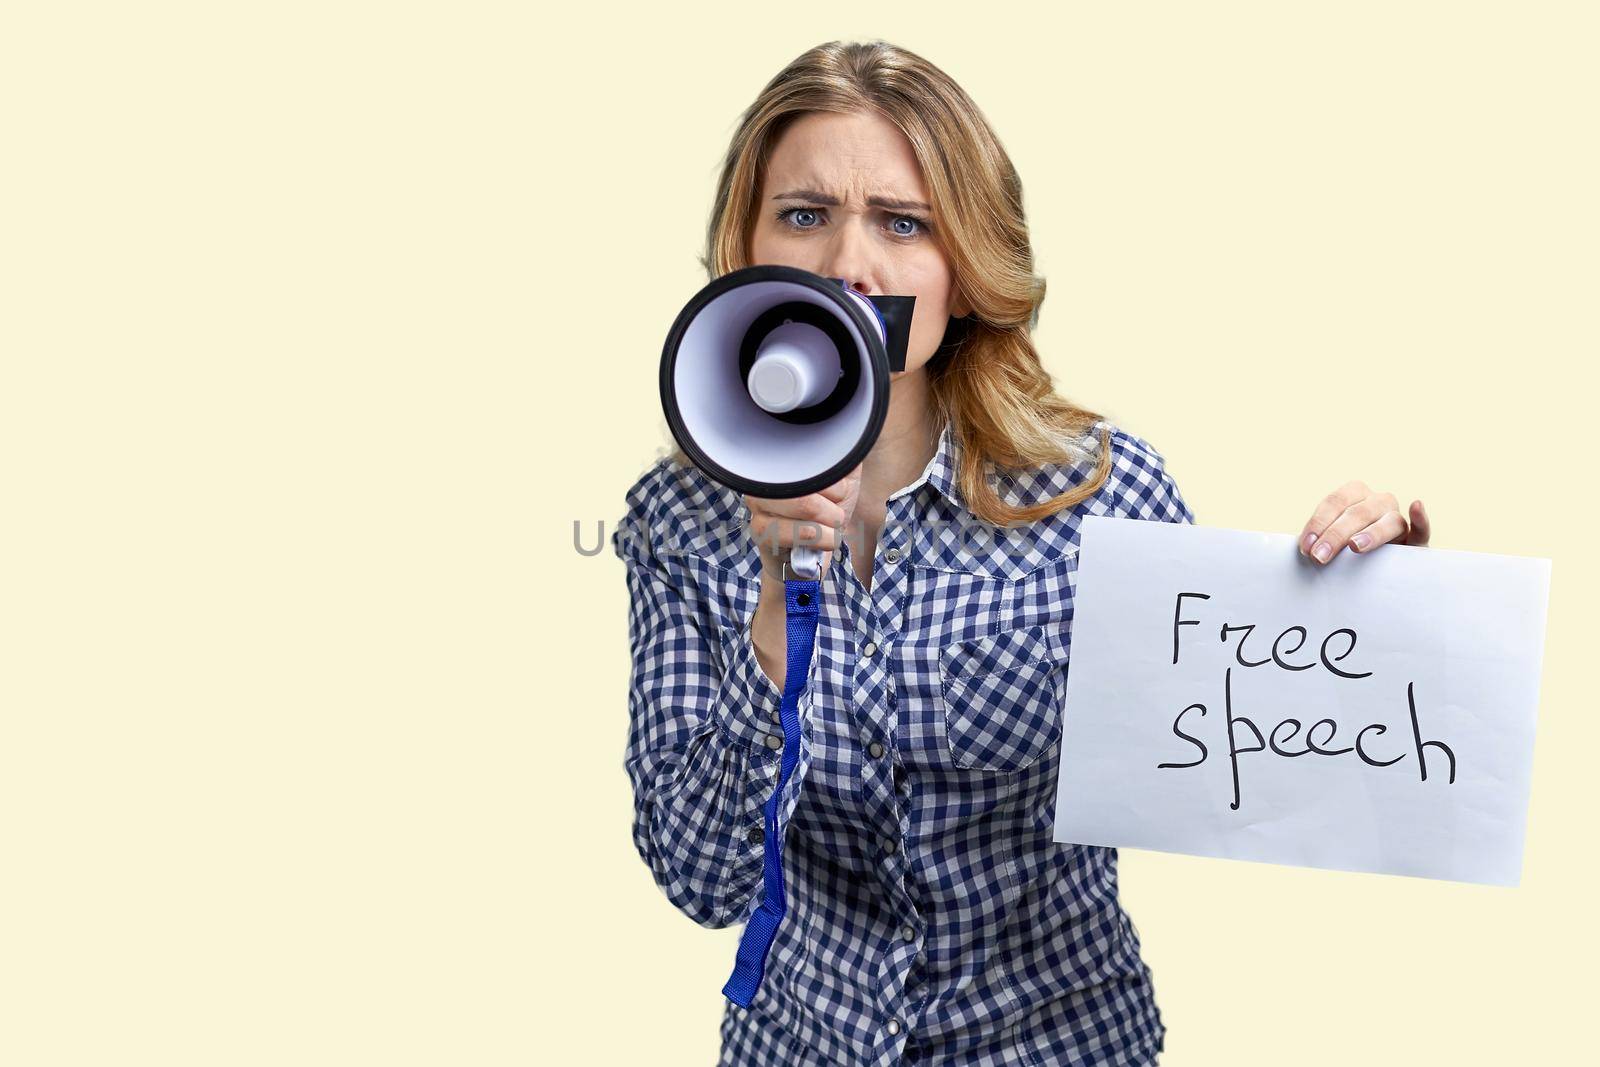 Upset woman protester with adhesive tape over mouth trying to speak in megaphone. Isolated on white background. Free speech.